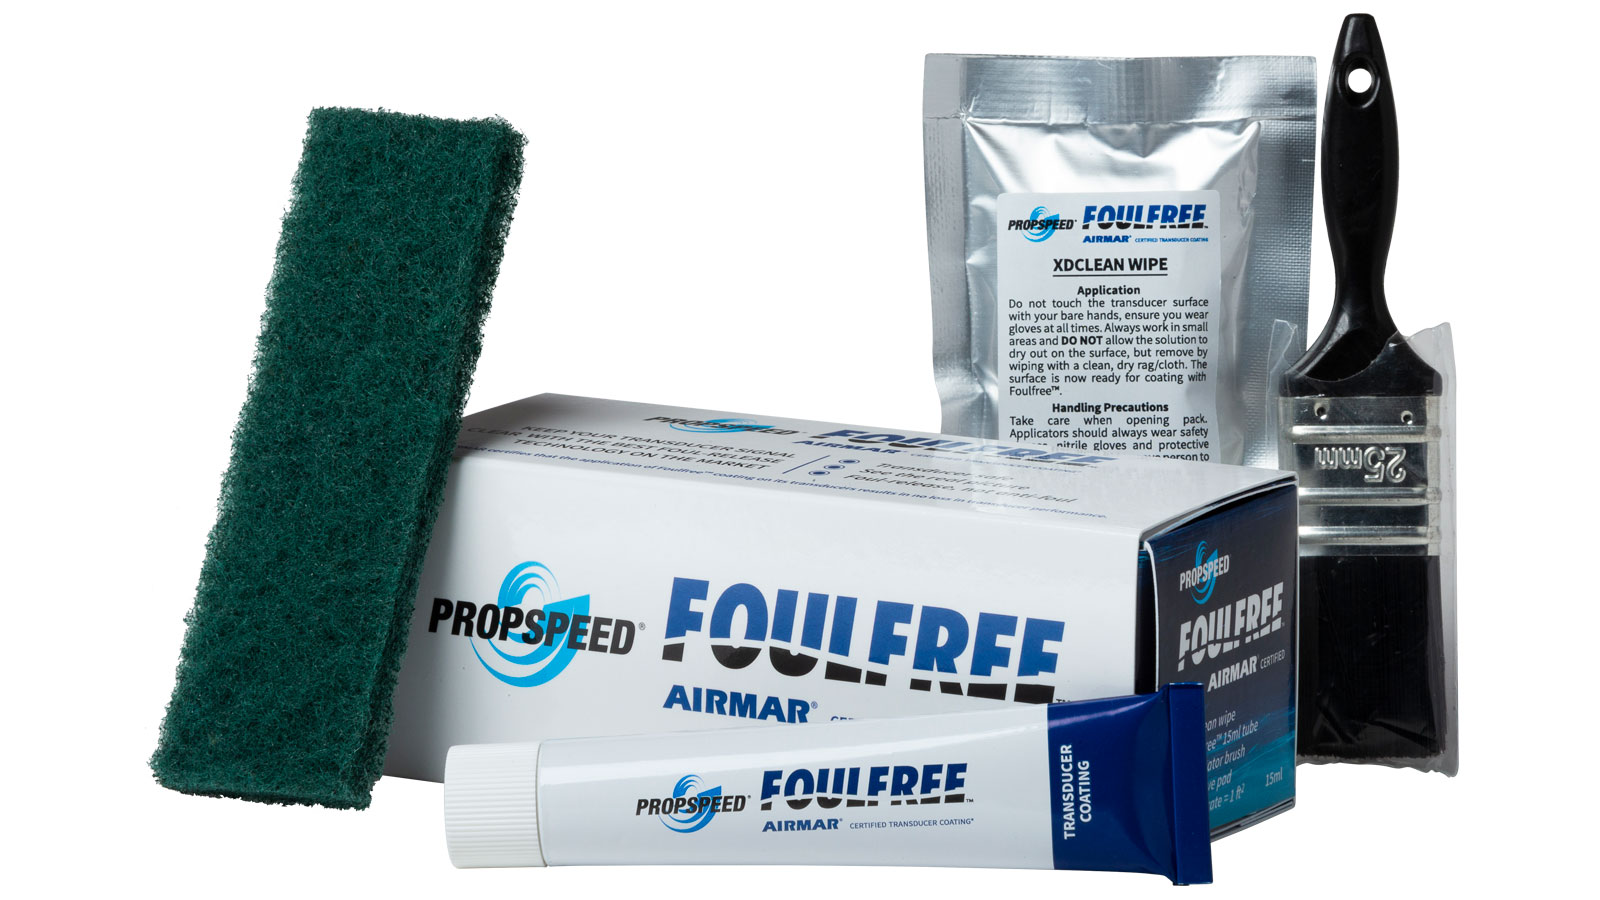 Foulfree box and contents